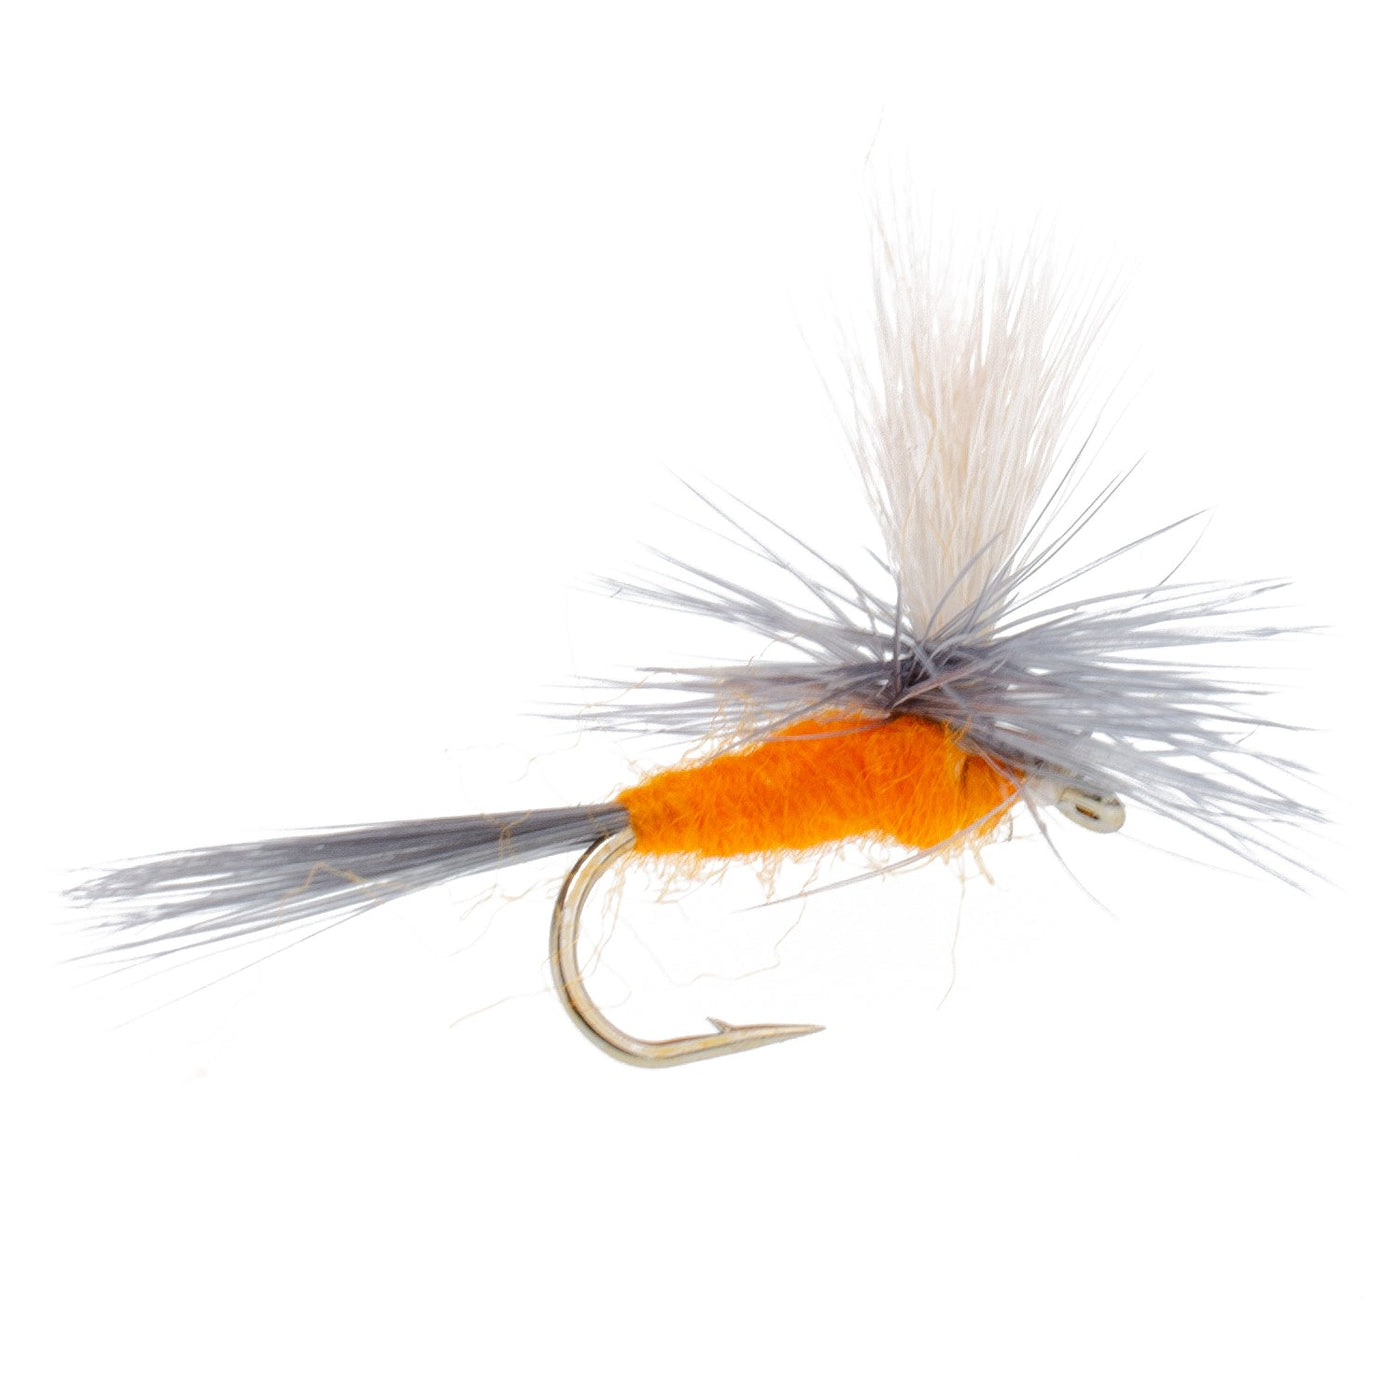 Eastern Trout Fly Assortment - 12 Essential Dry and Nymph Fly Fishing –  Wasatch Tenkara Rods